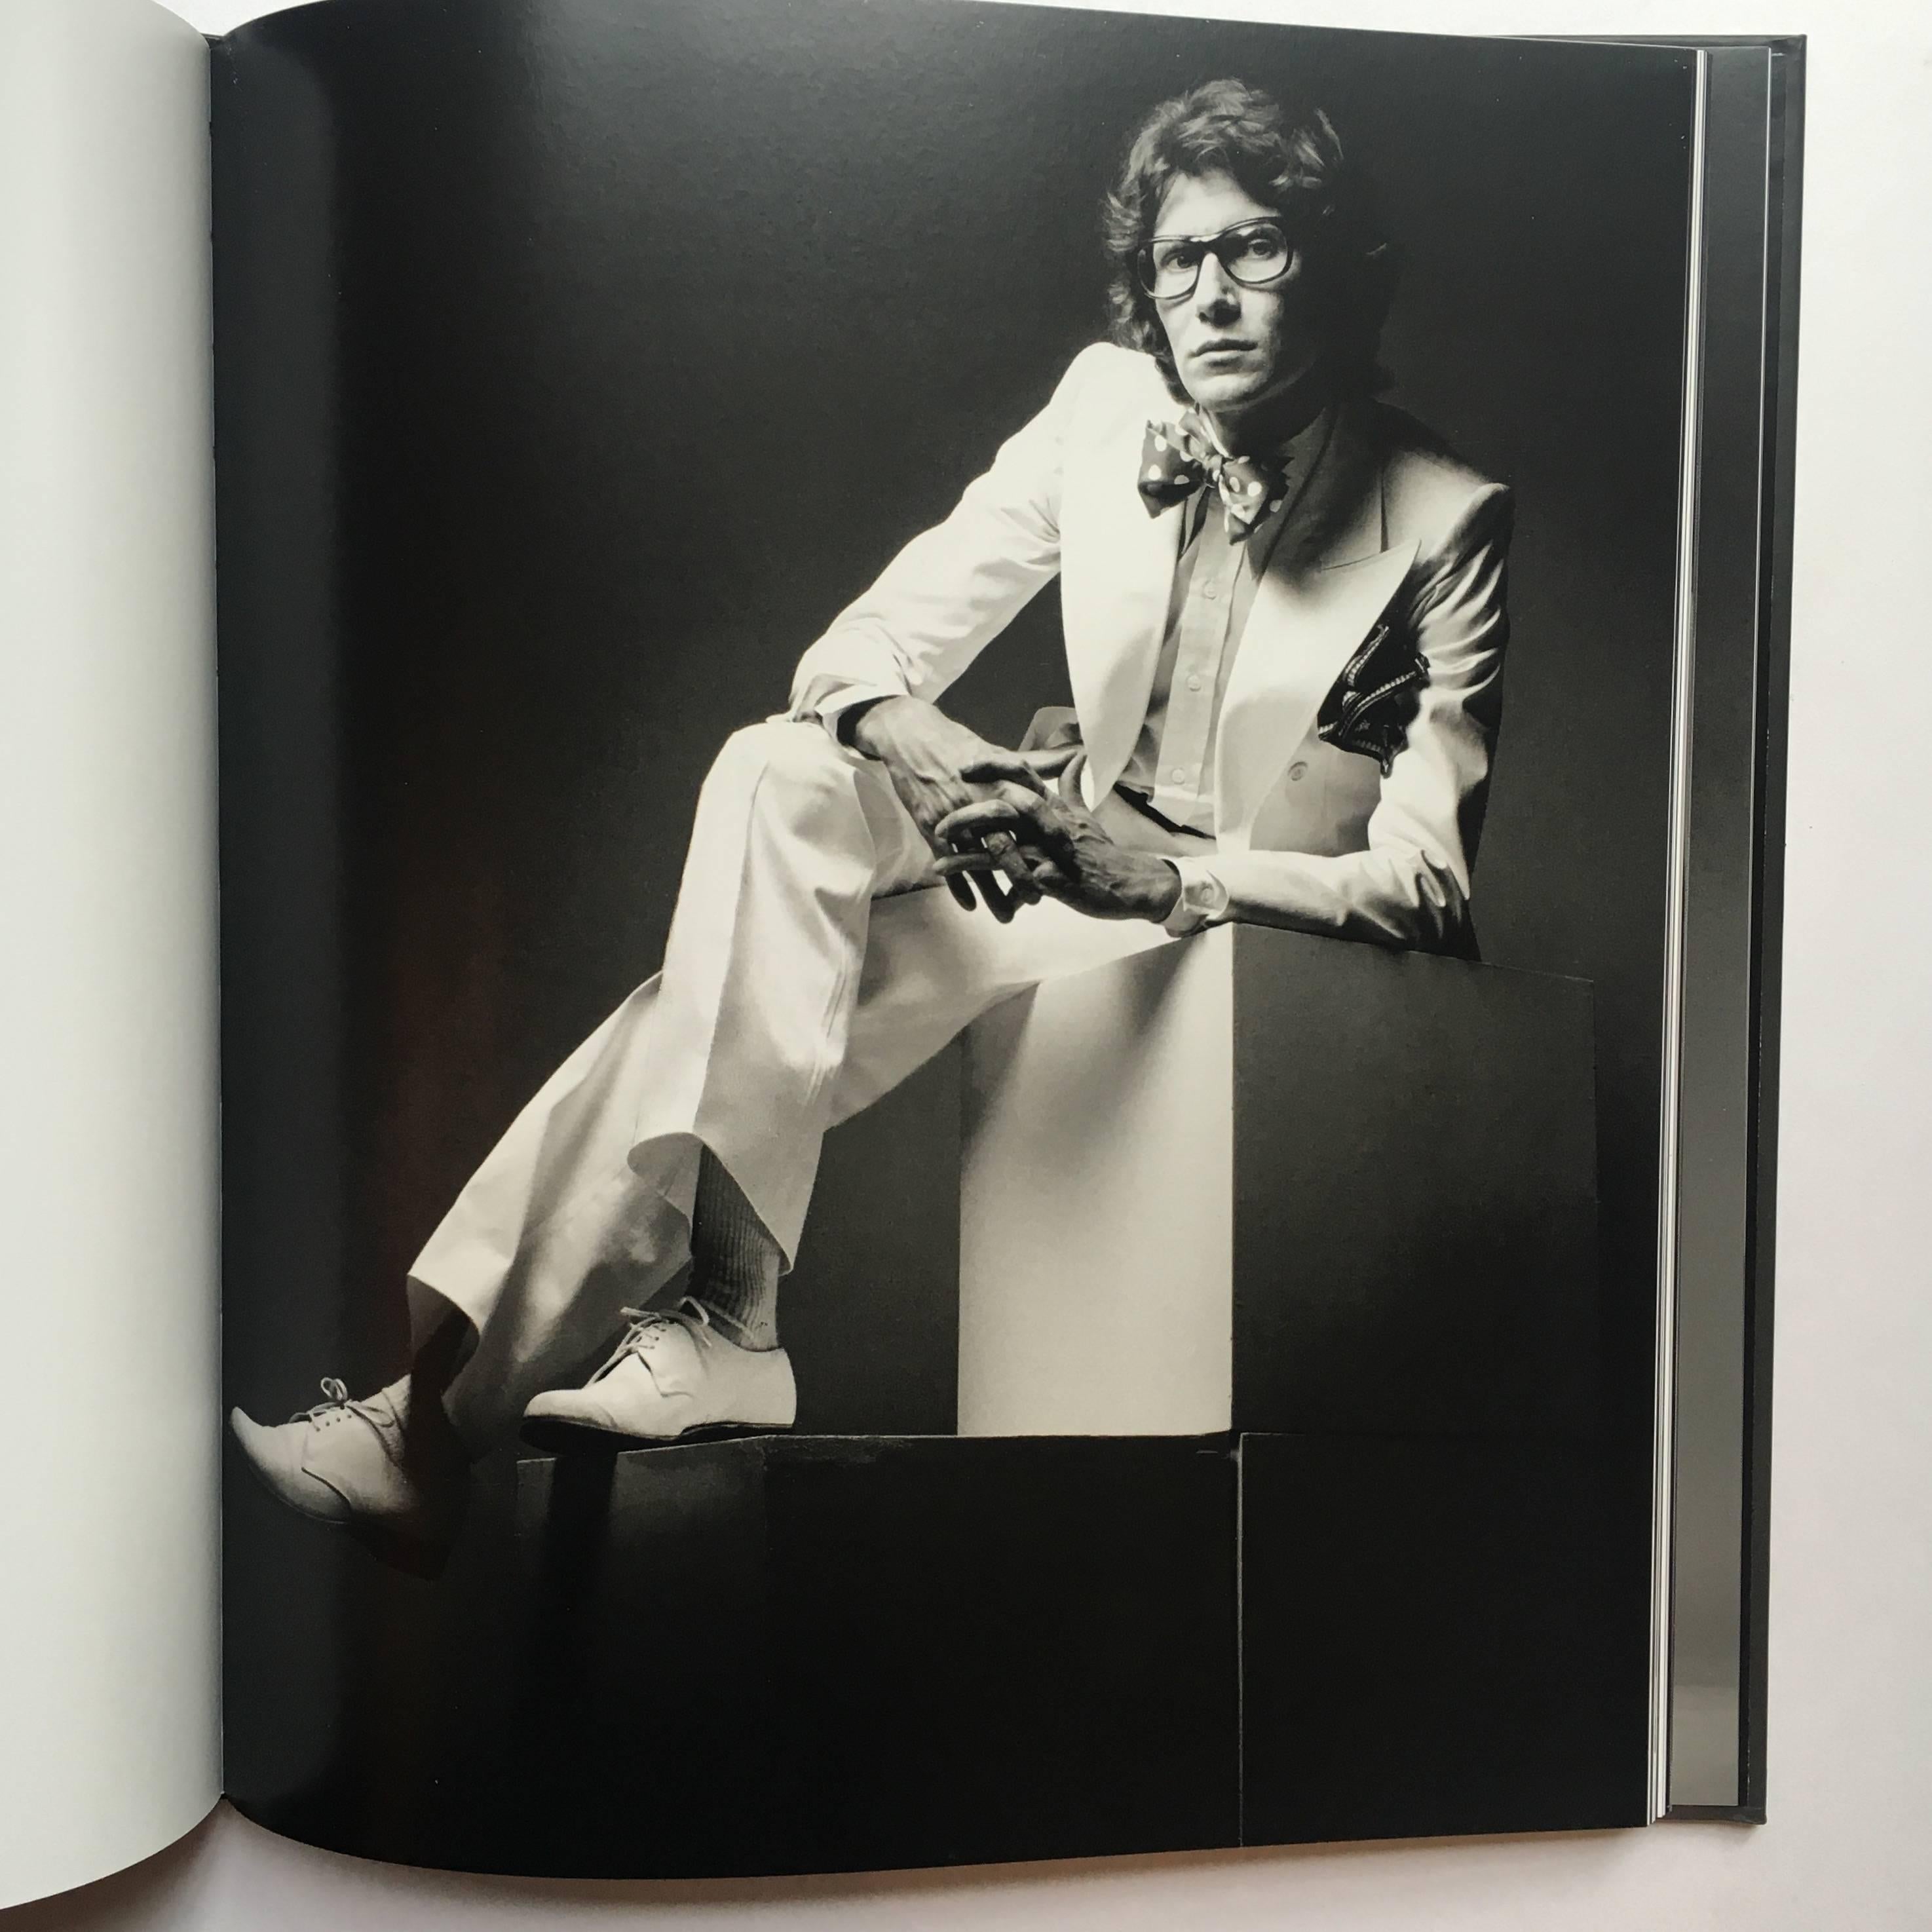 First edition hardcover, published by Albin Michel, Paris, 2010 in an acrylic slipcase.

‘Yves Saint Laurent Laid Bare’

A collection of Jeanloup Sieff’s incredibly intimate and unpretentious portraits of Yves Saint Laurent; ‘Les Portraits Nus’ &